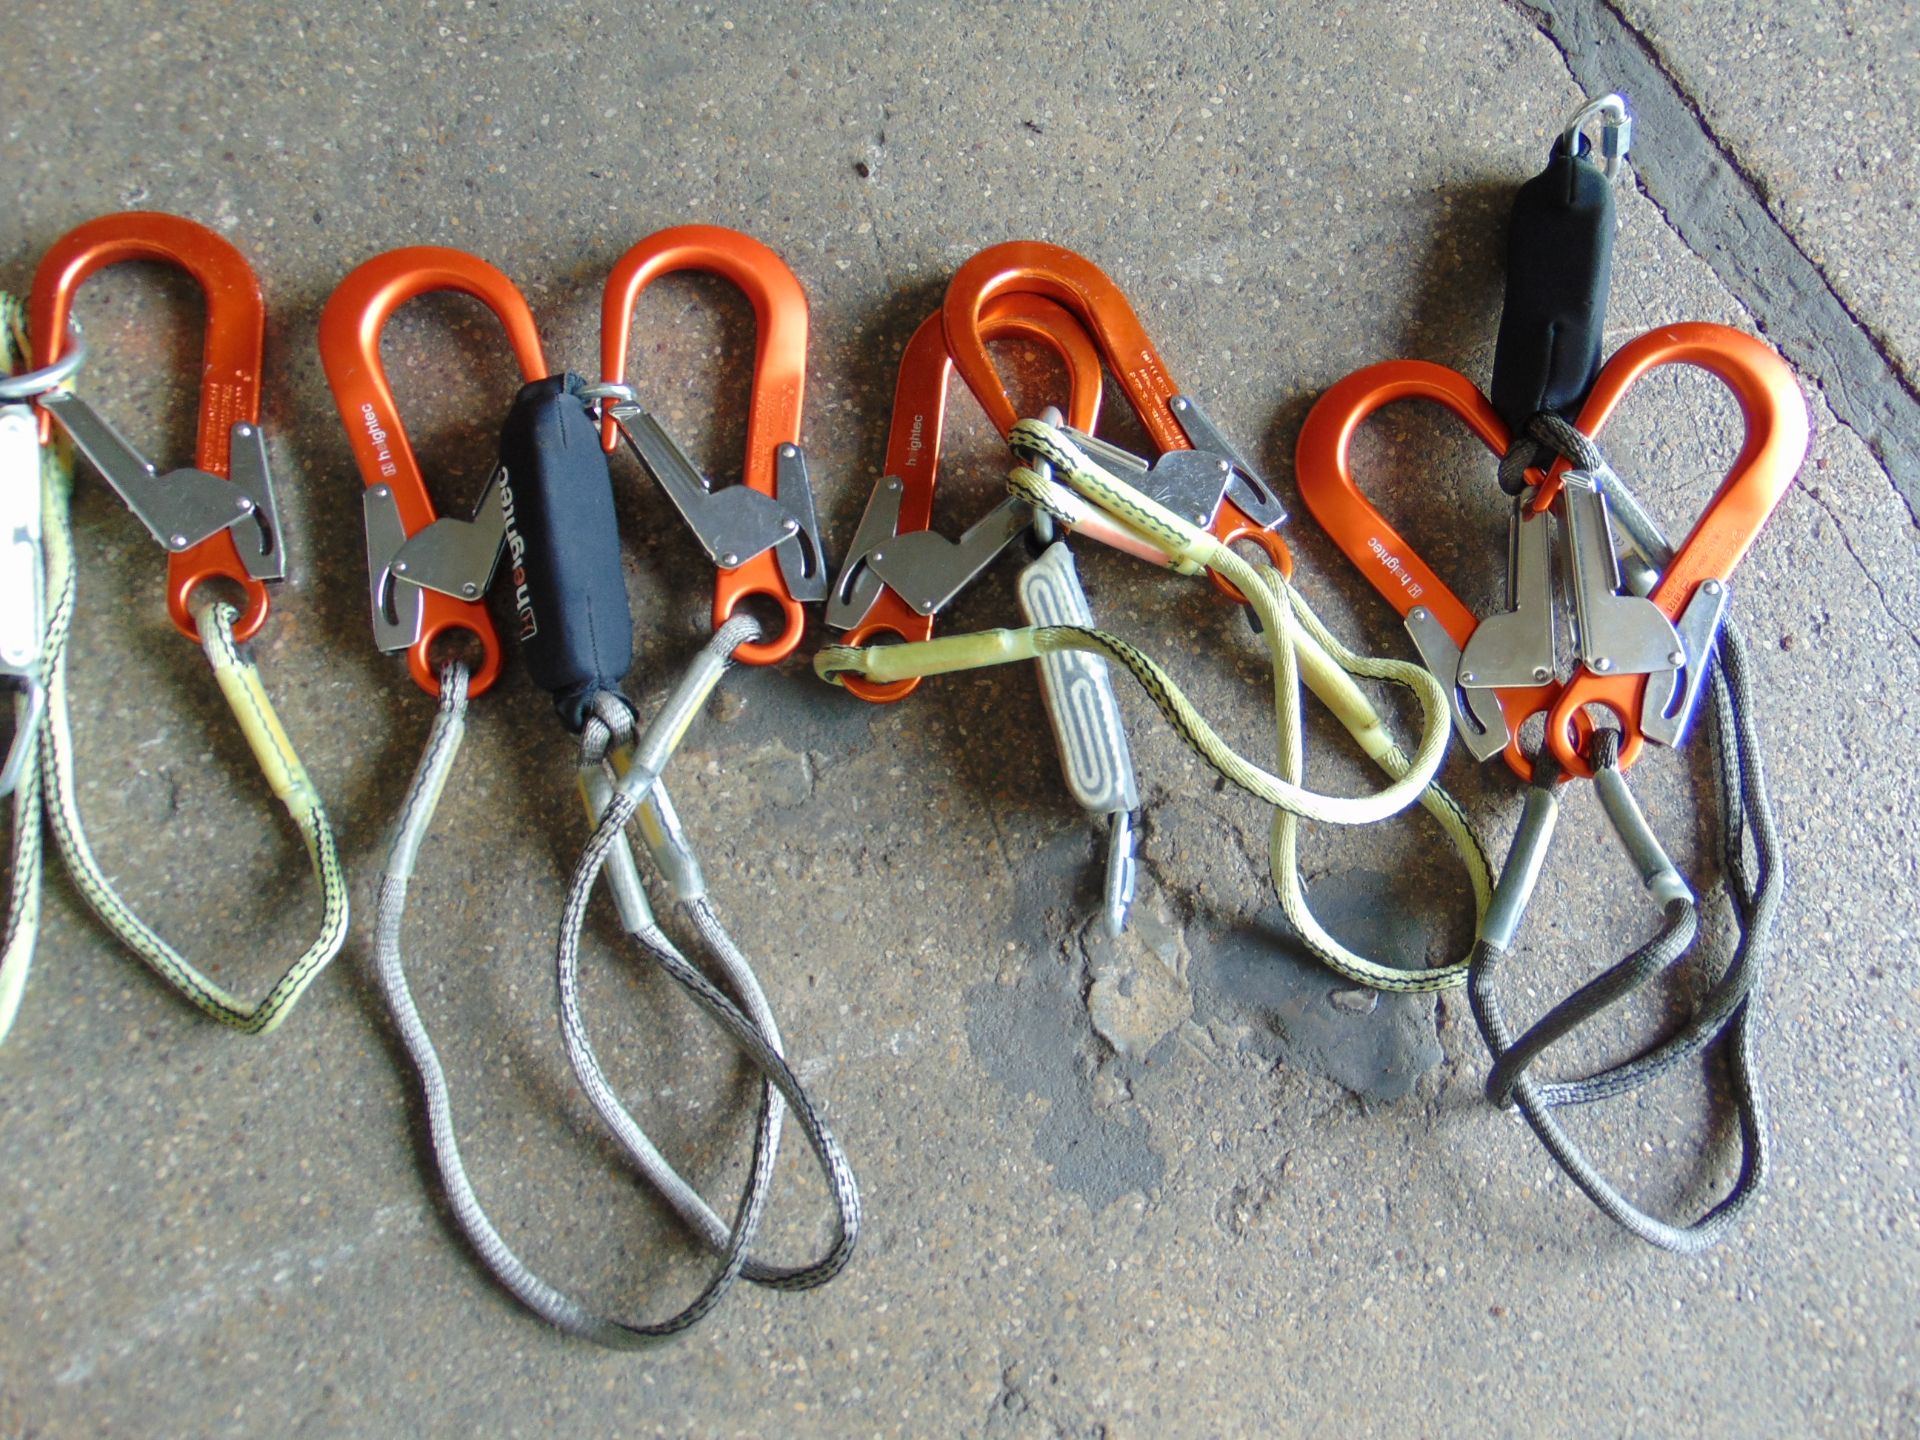 6 x Heightec Twin Lanyards c/w Oval Scaff Hooks - Image 3 of 7